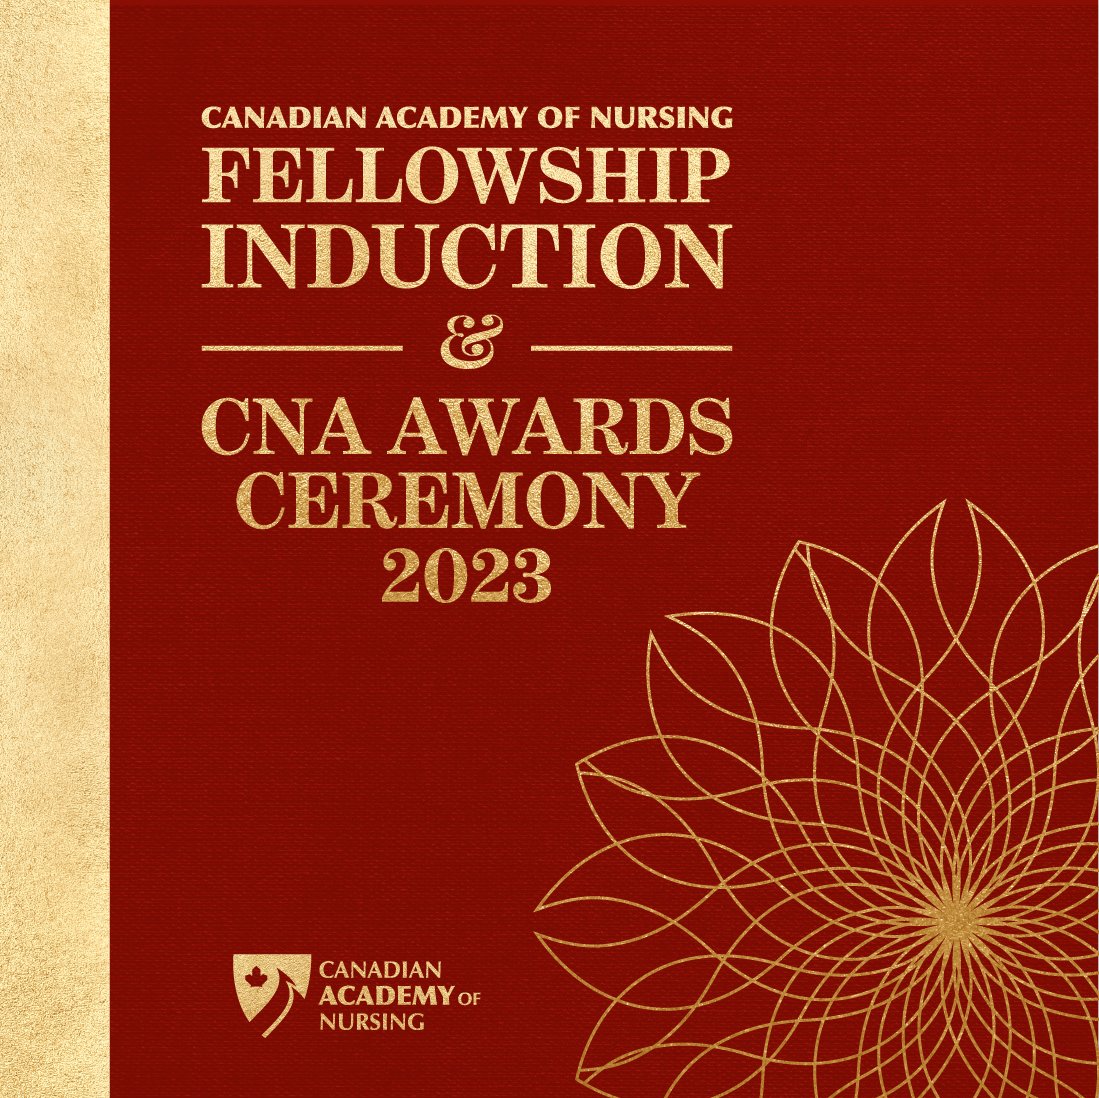 Join us as we celebrate the Canadian Academy of Nursing’s 2023 class of Fellows and 2022 award recipients in a virtual induction ceremony on Wednesday, October 4, from 12:00 to 14:00 (ET). Register today! - bit.ly/3t74igl